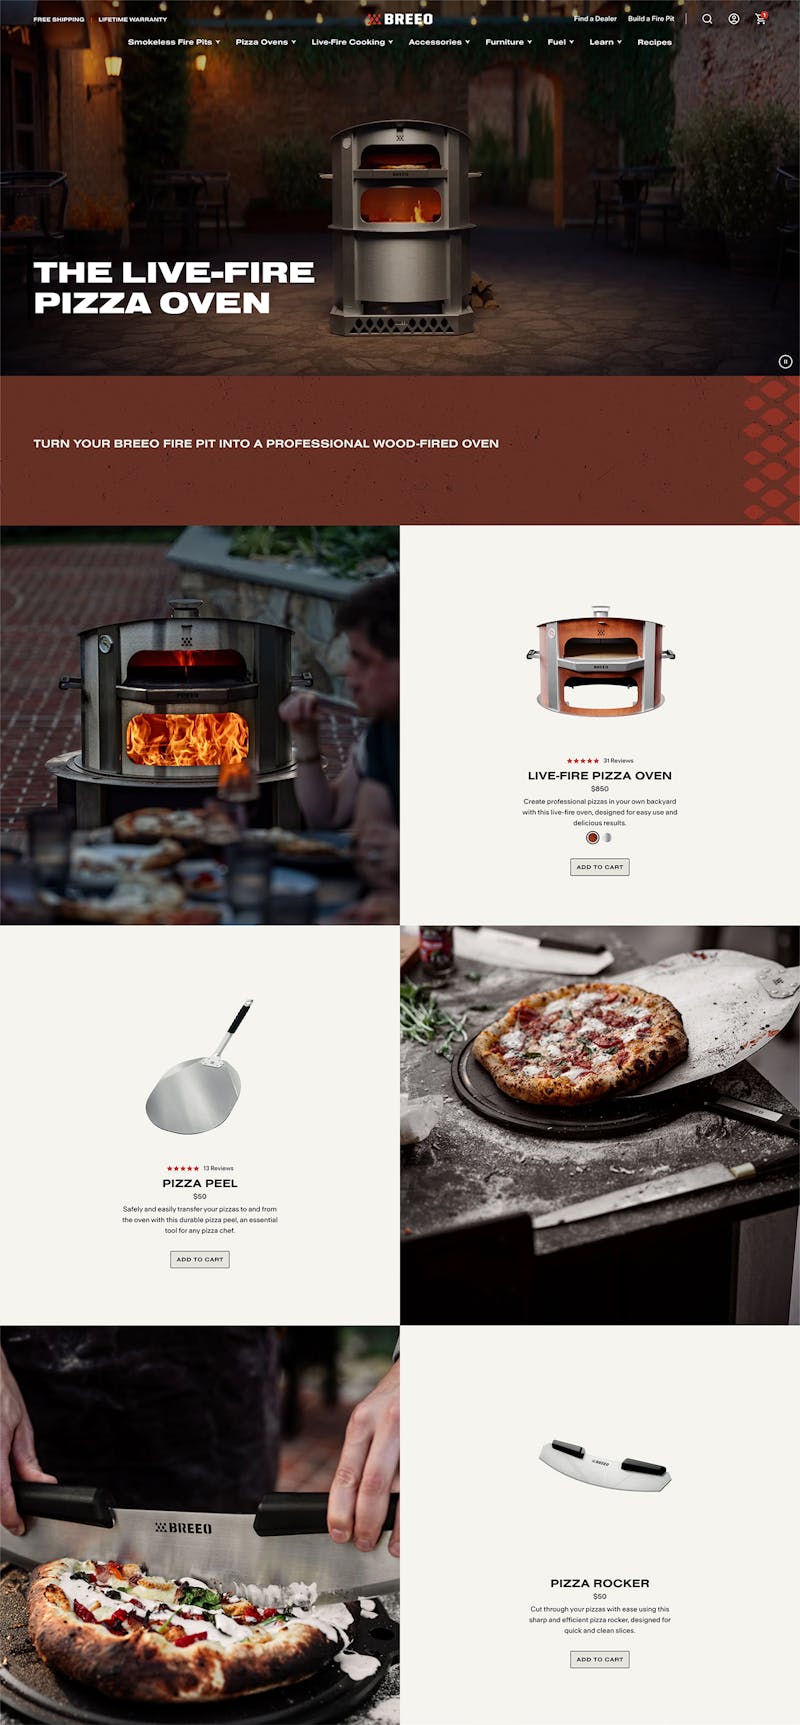 Breeo pizza ovens